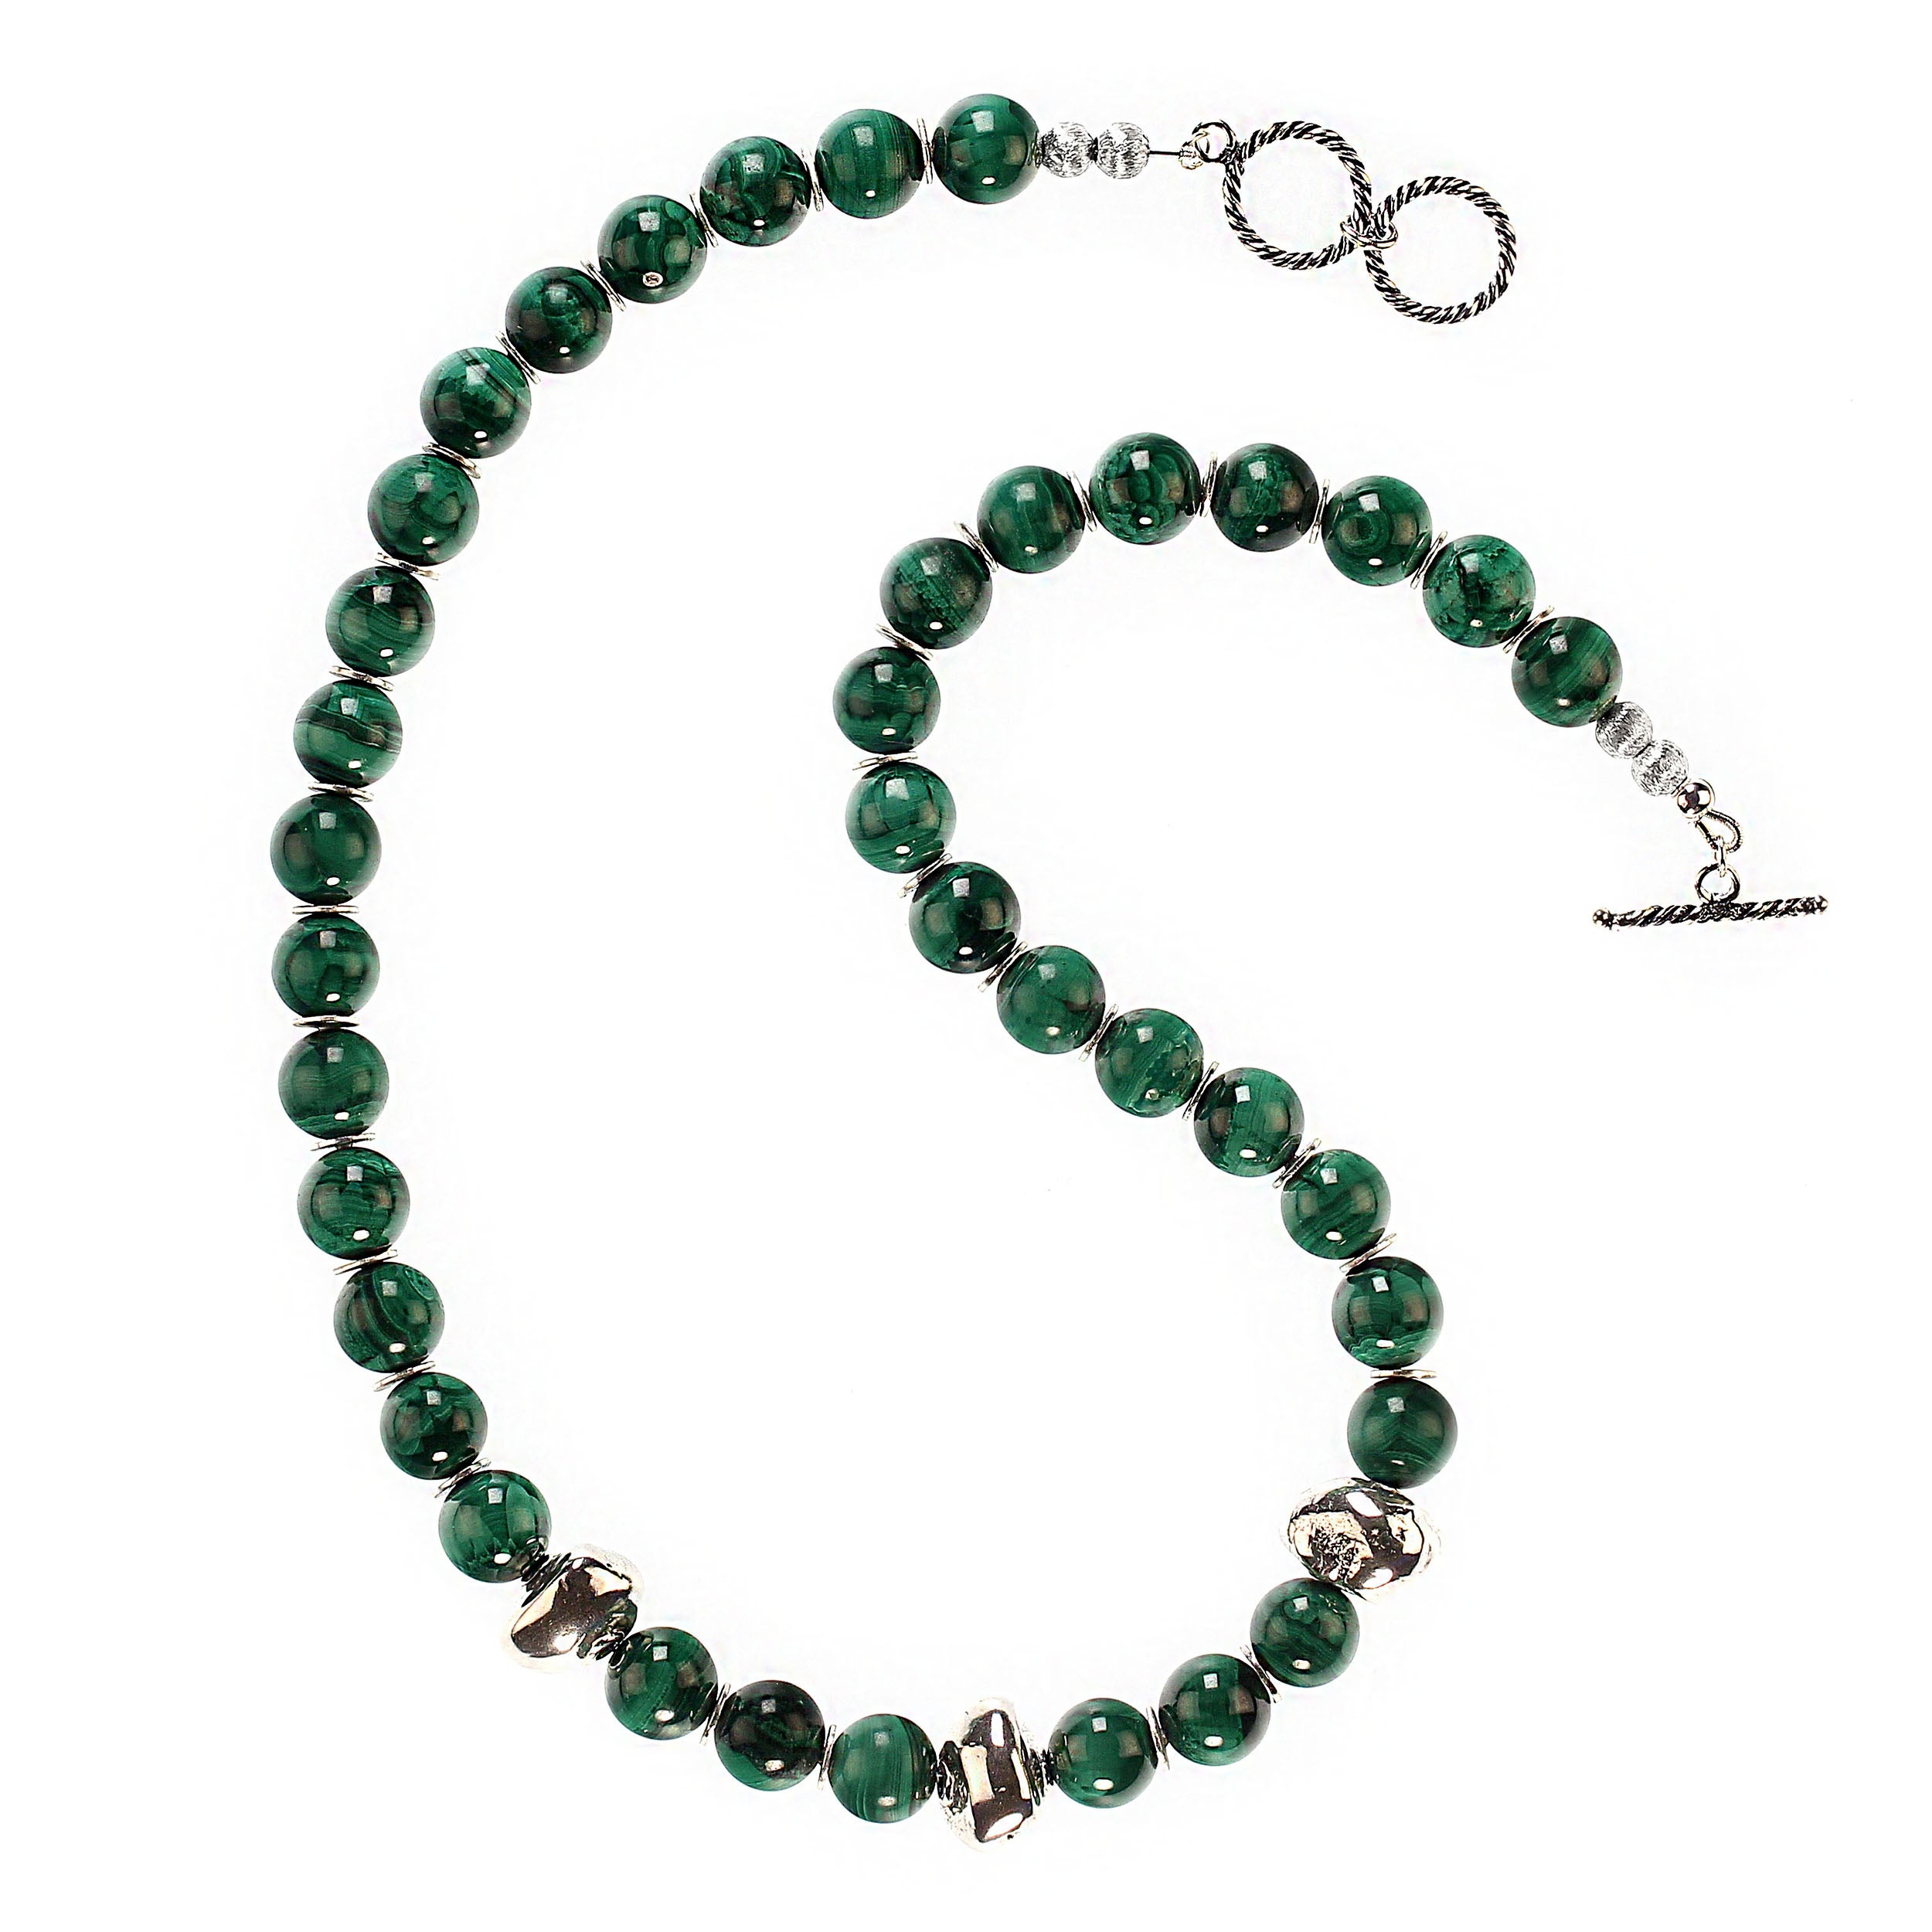 Artisan AJD 20 Inch Marvelous Malachite with Sterling Silver Accents necklace